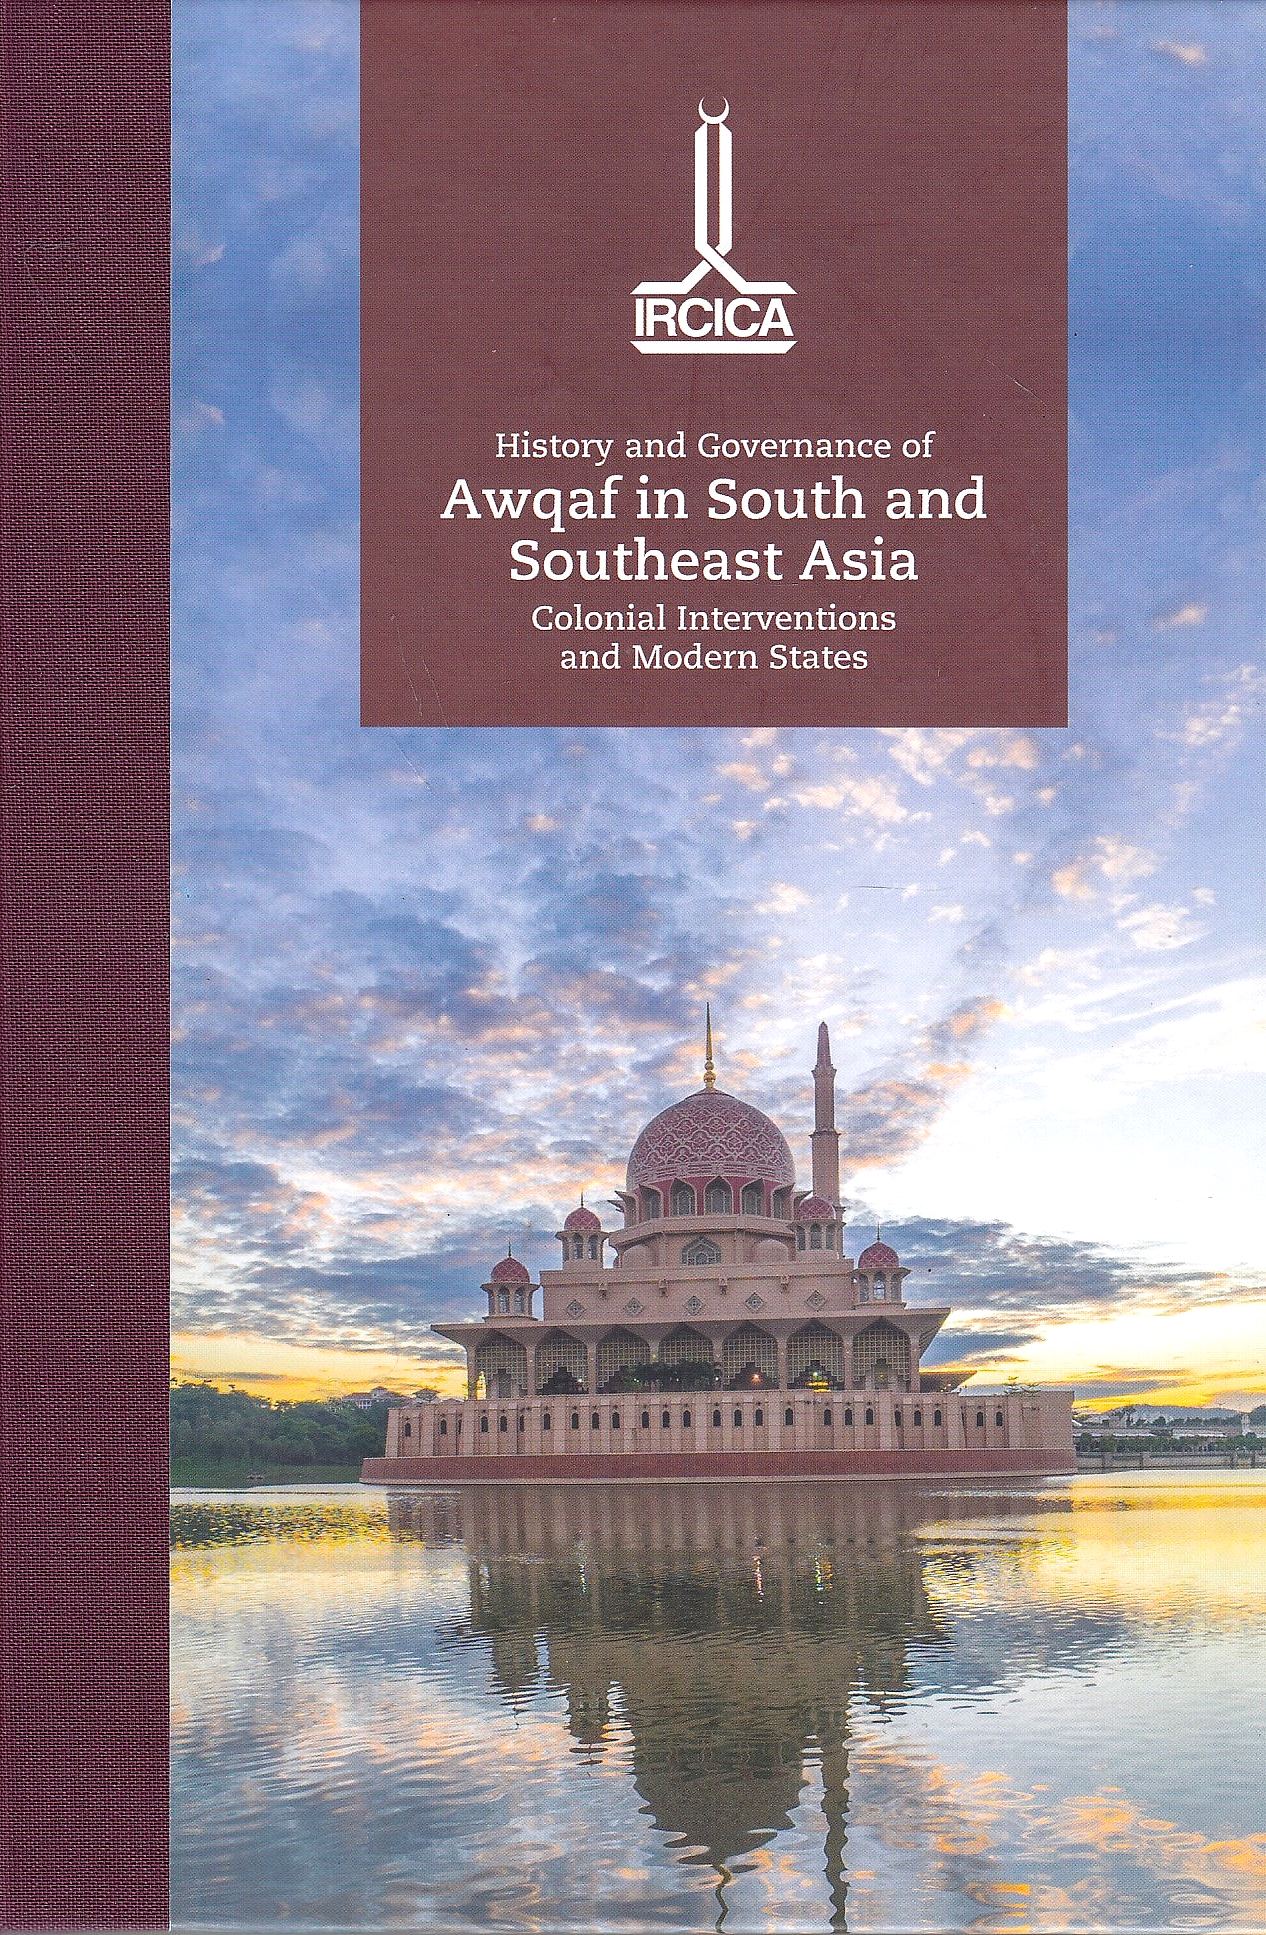 Proceedings of the International Congress on History and Governance of Awqaf in South and Southeast Asia.